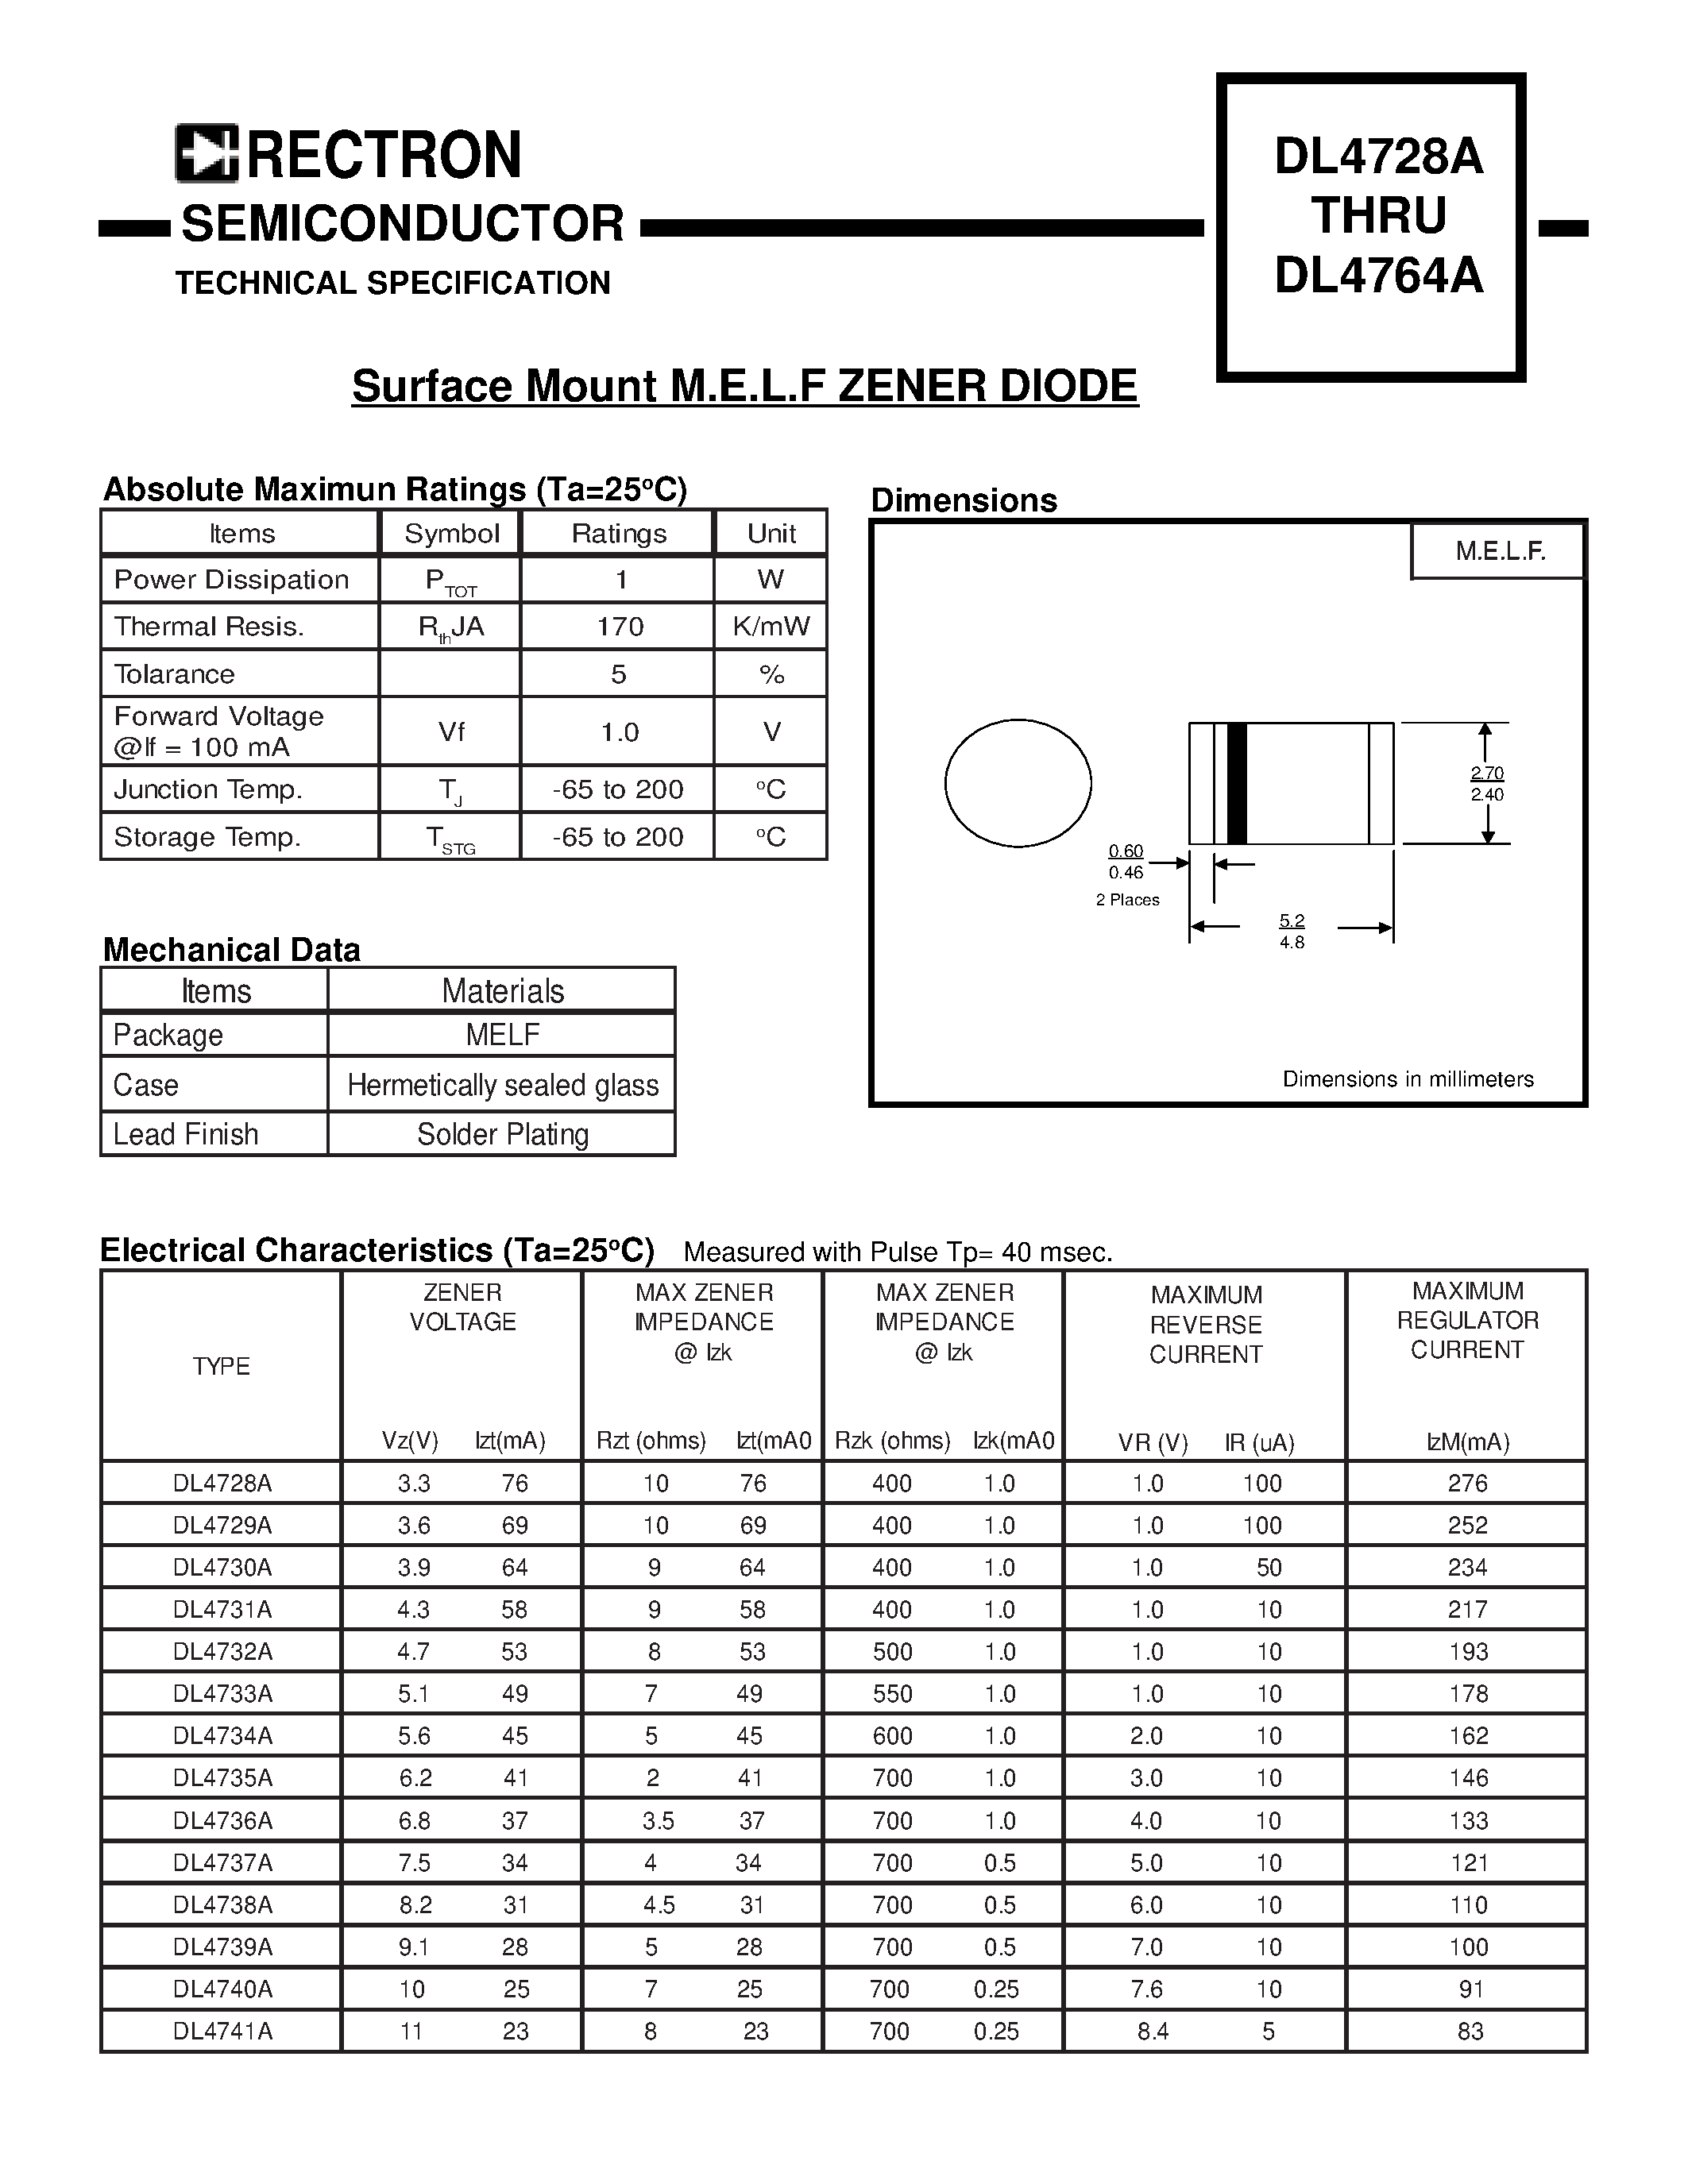 Datasheet DL4742A - Surface Mount M.E.L.F ZENER DIODE page 1